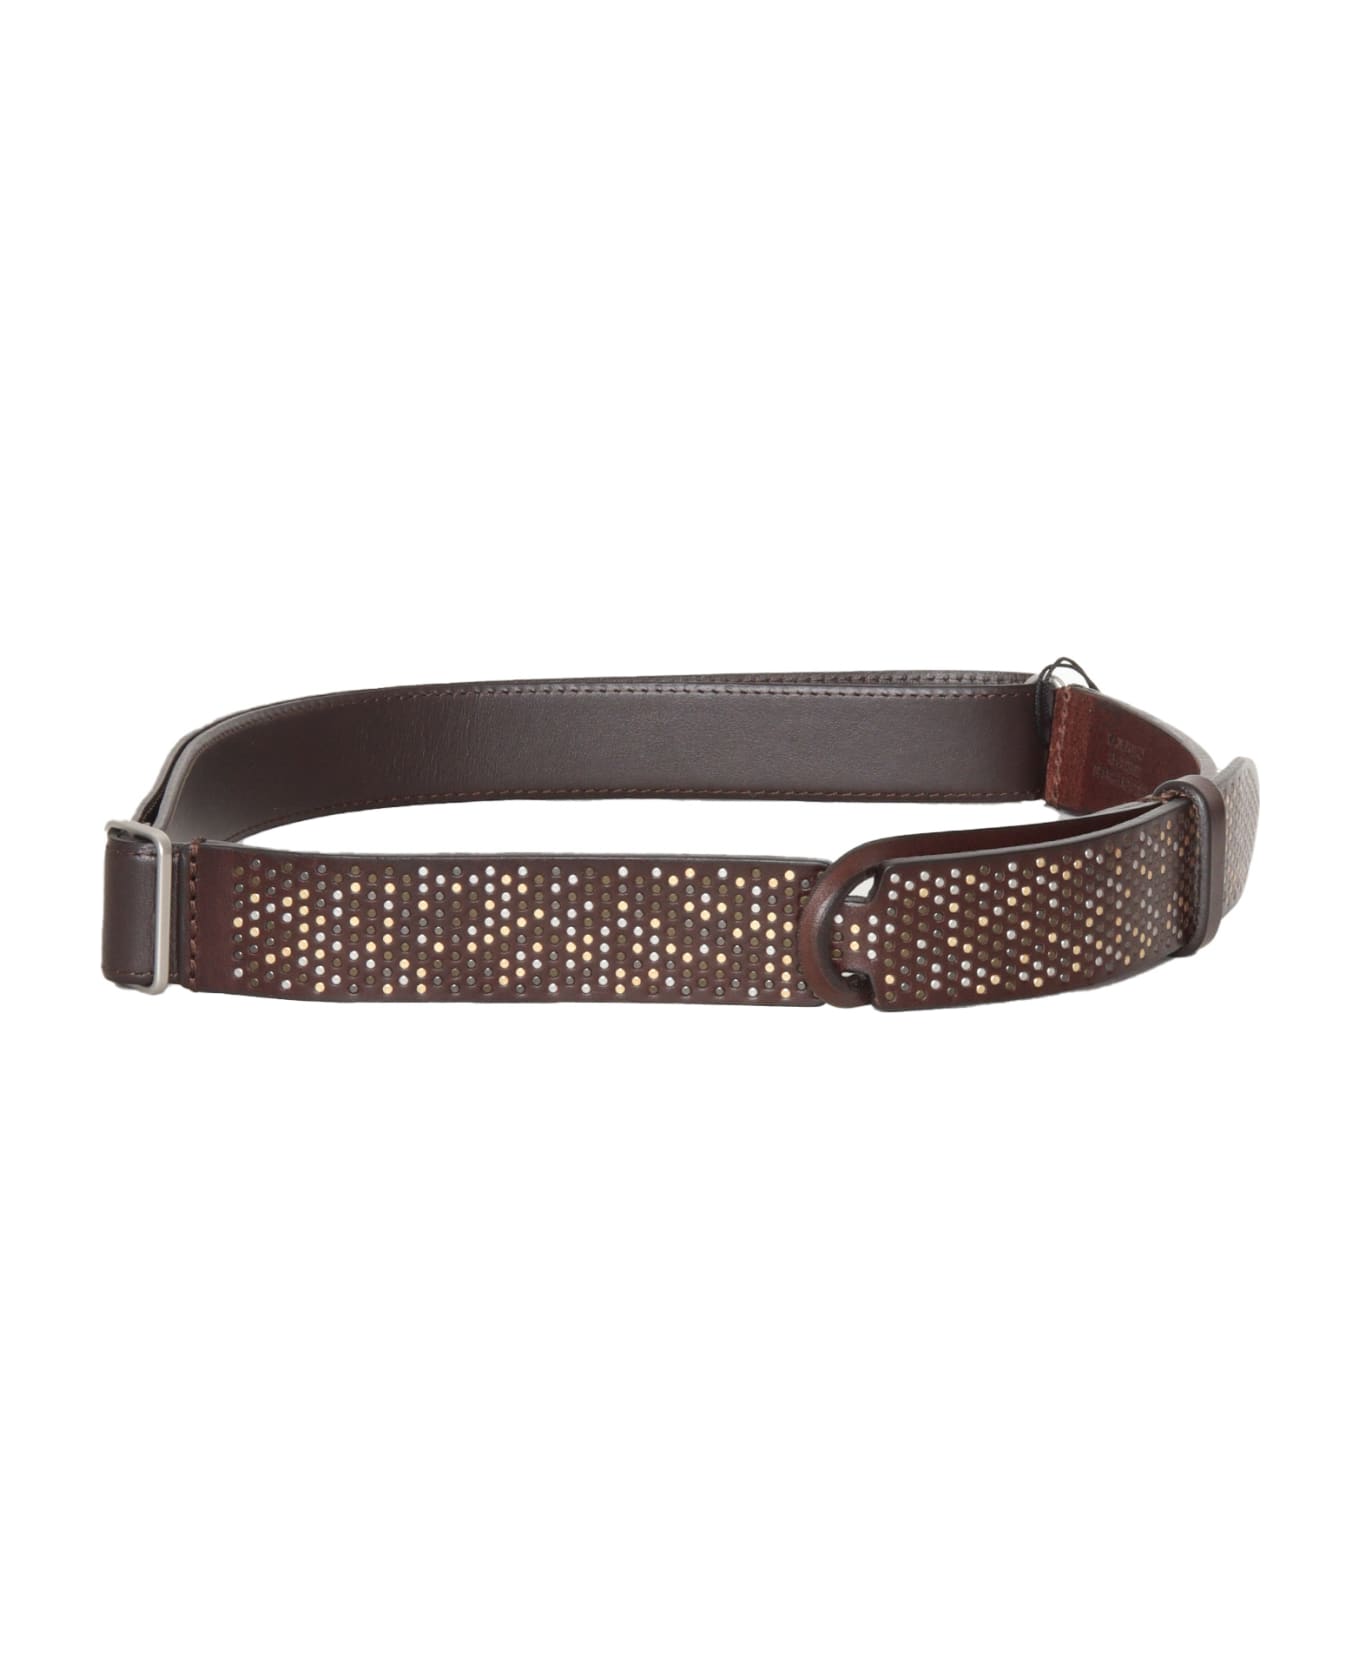 Orciani Men's Leather Belt - BROWN